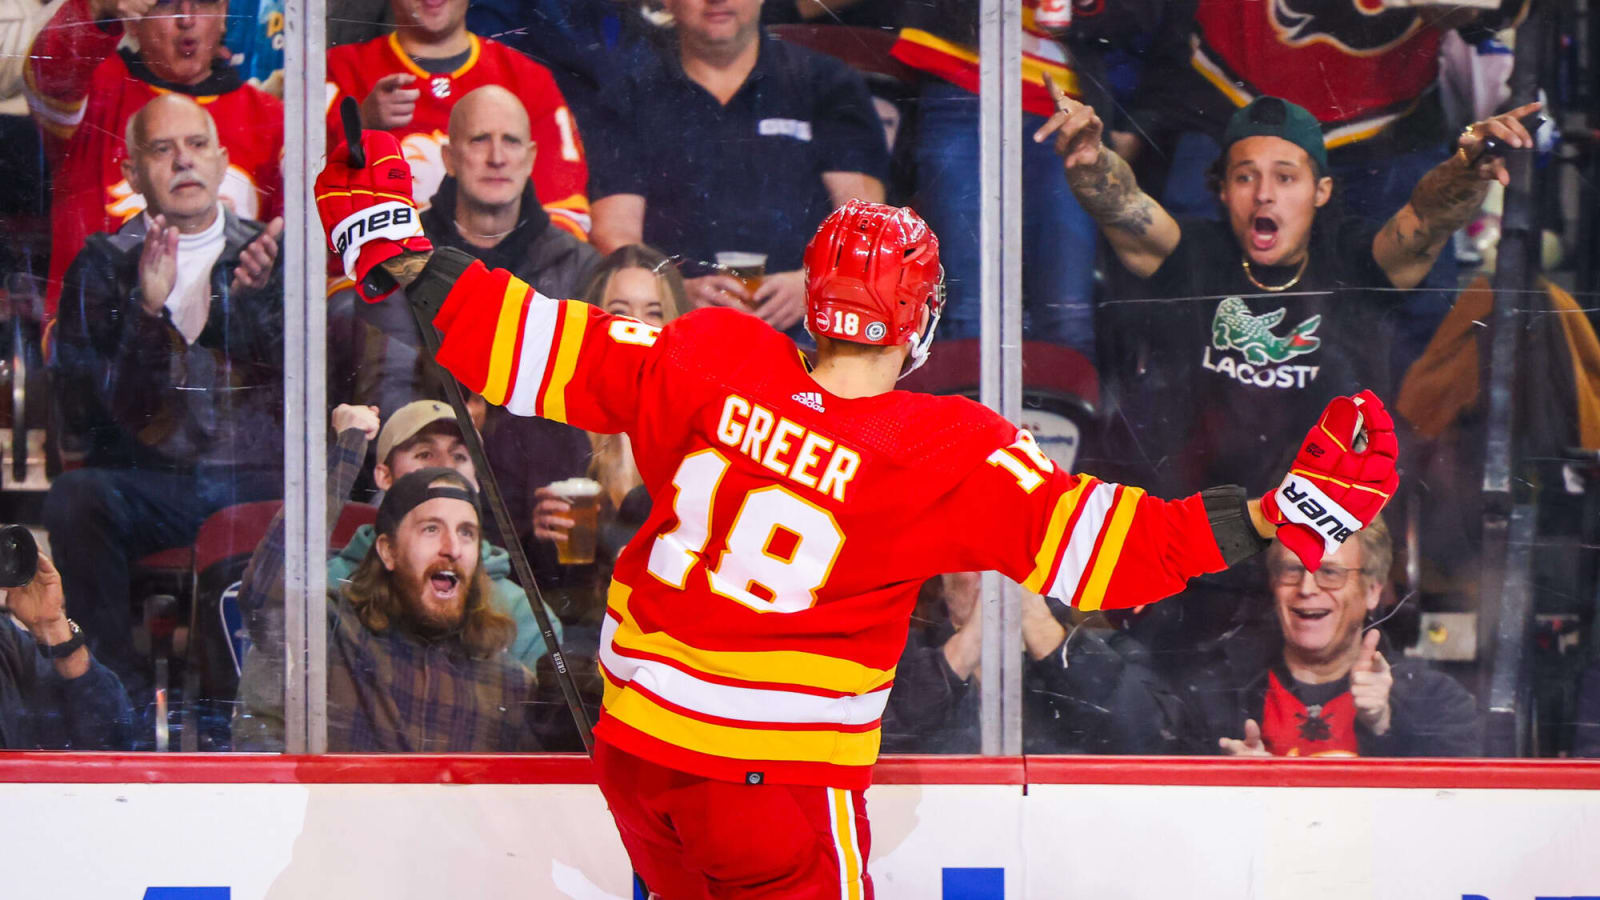 A.J. Greer was an effective member of the Calgary Flames (prior to his injury)